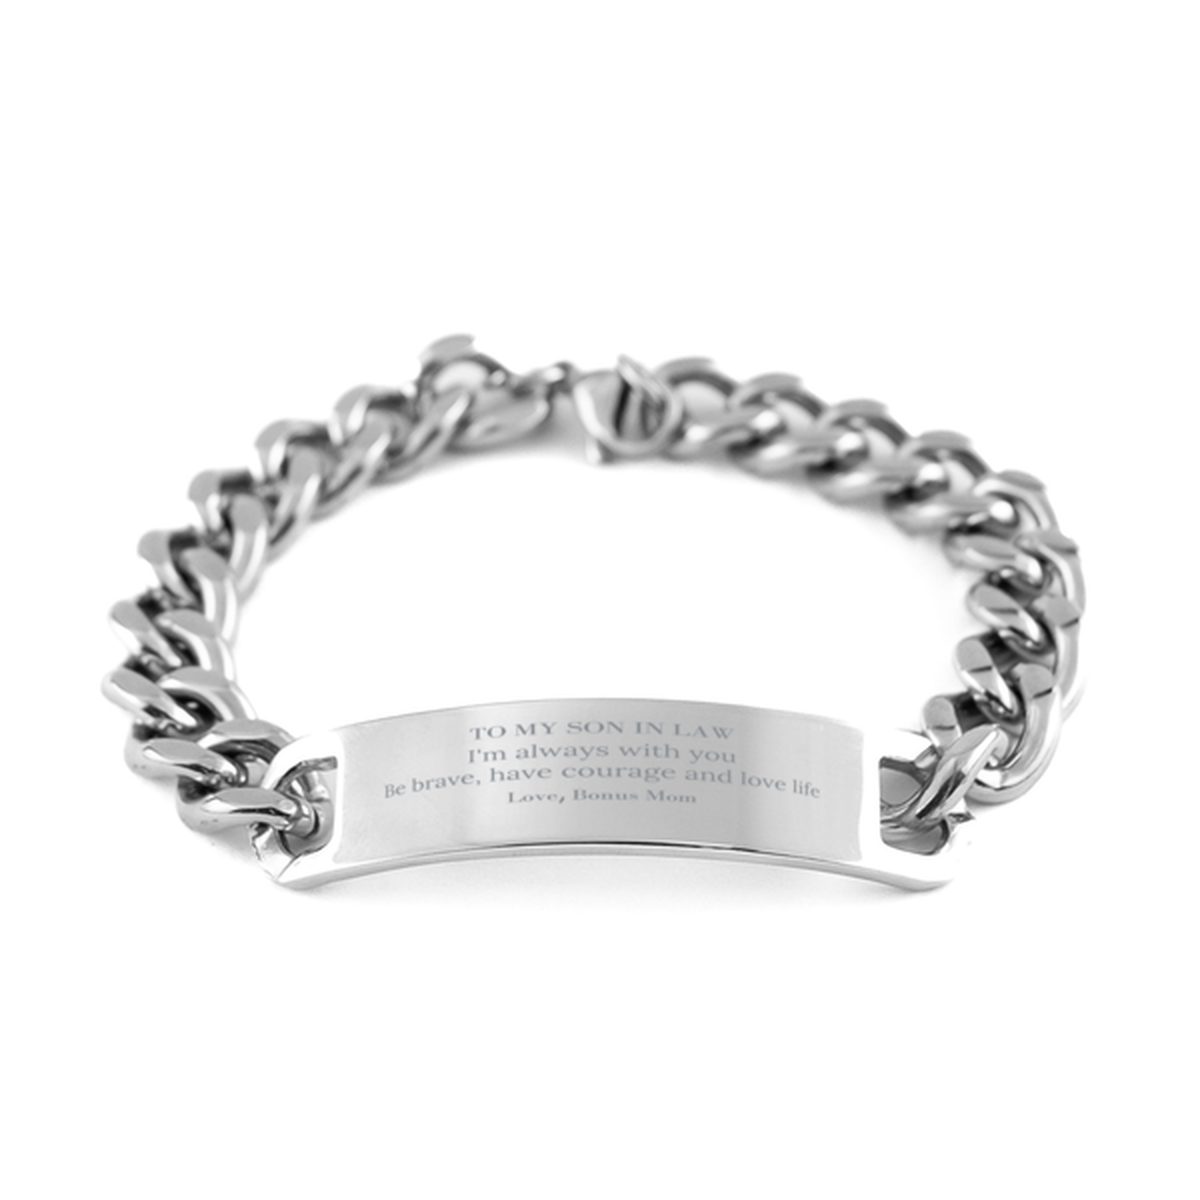 To My Son In Law Gifts from Bonus Mom, Unique Cuban Chain Stainless Steel Bracelet Inspirational Christmas Birthday Graduation Gifts for Son In Law I'm always with you. Be brave, have courage and love life. Love, Bonus Mom